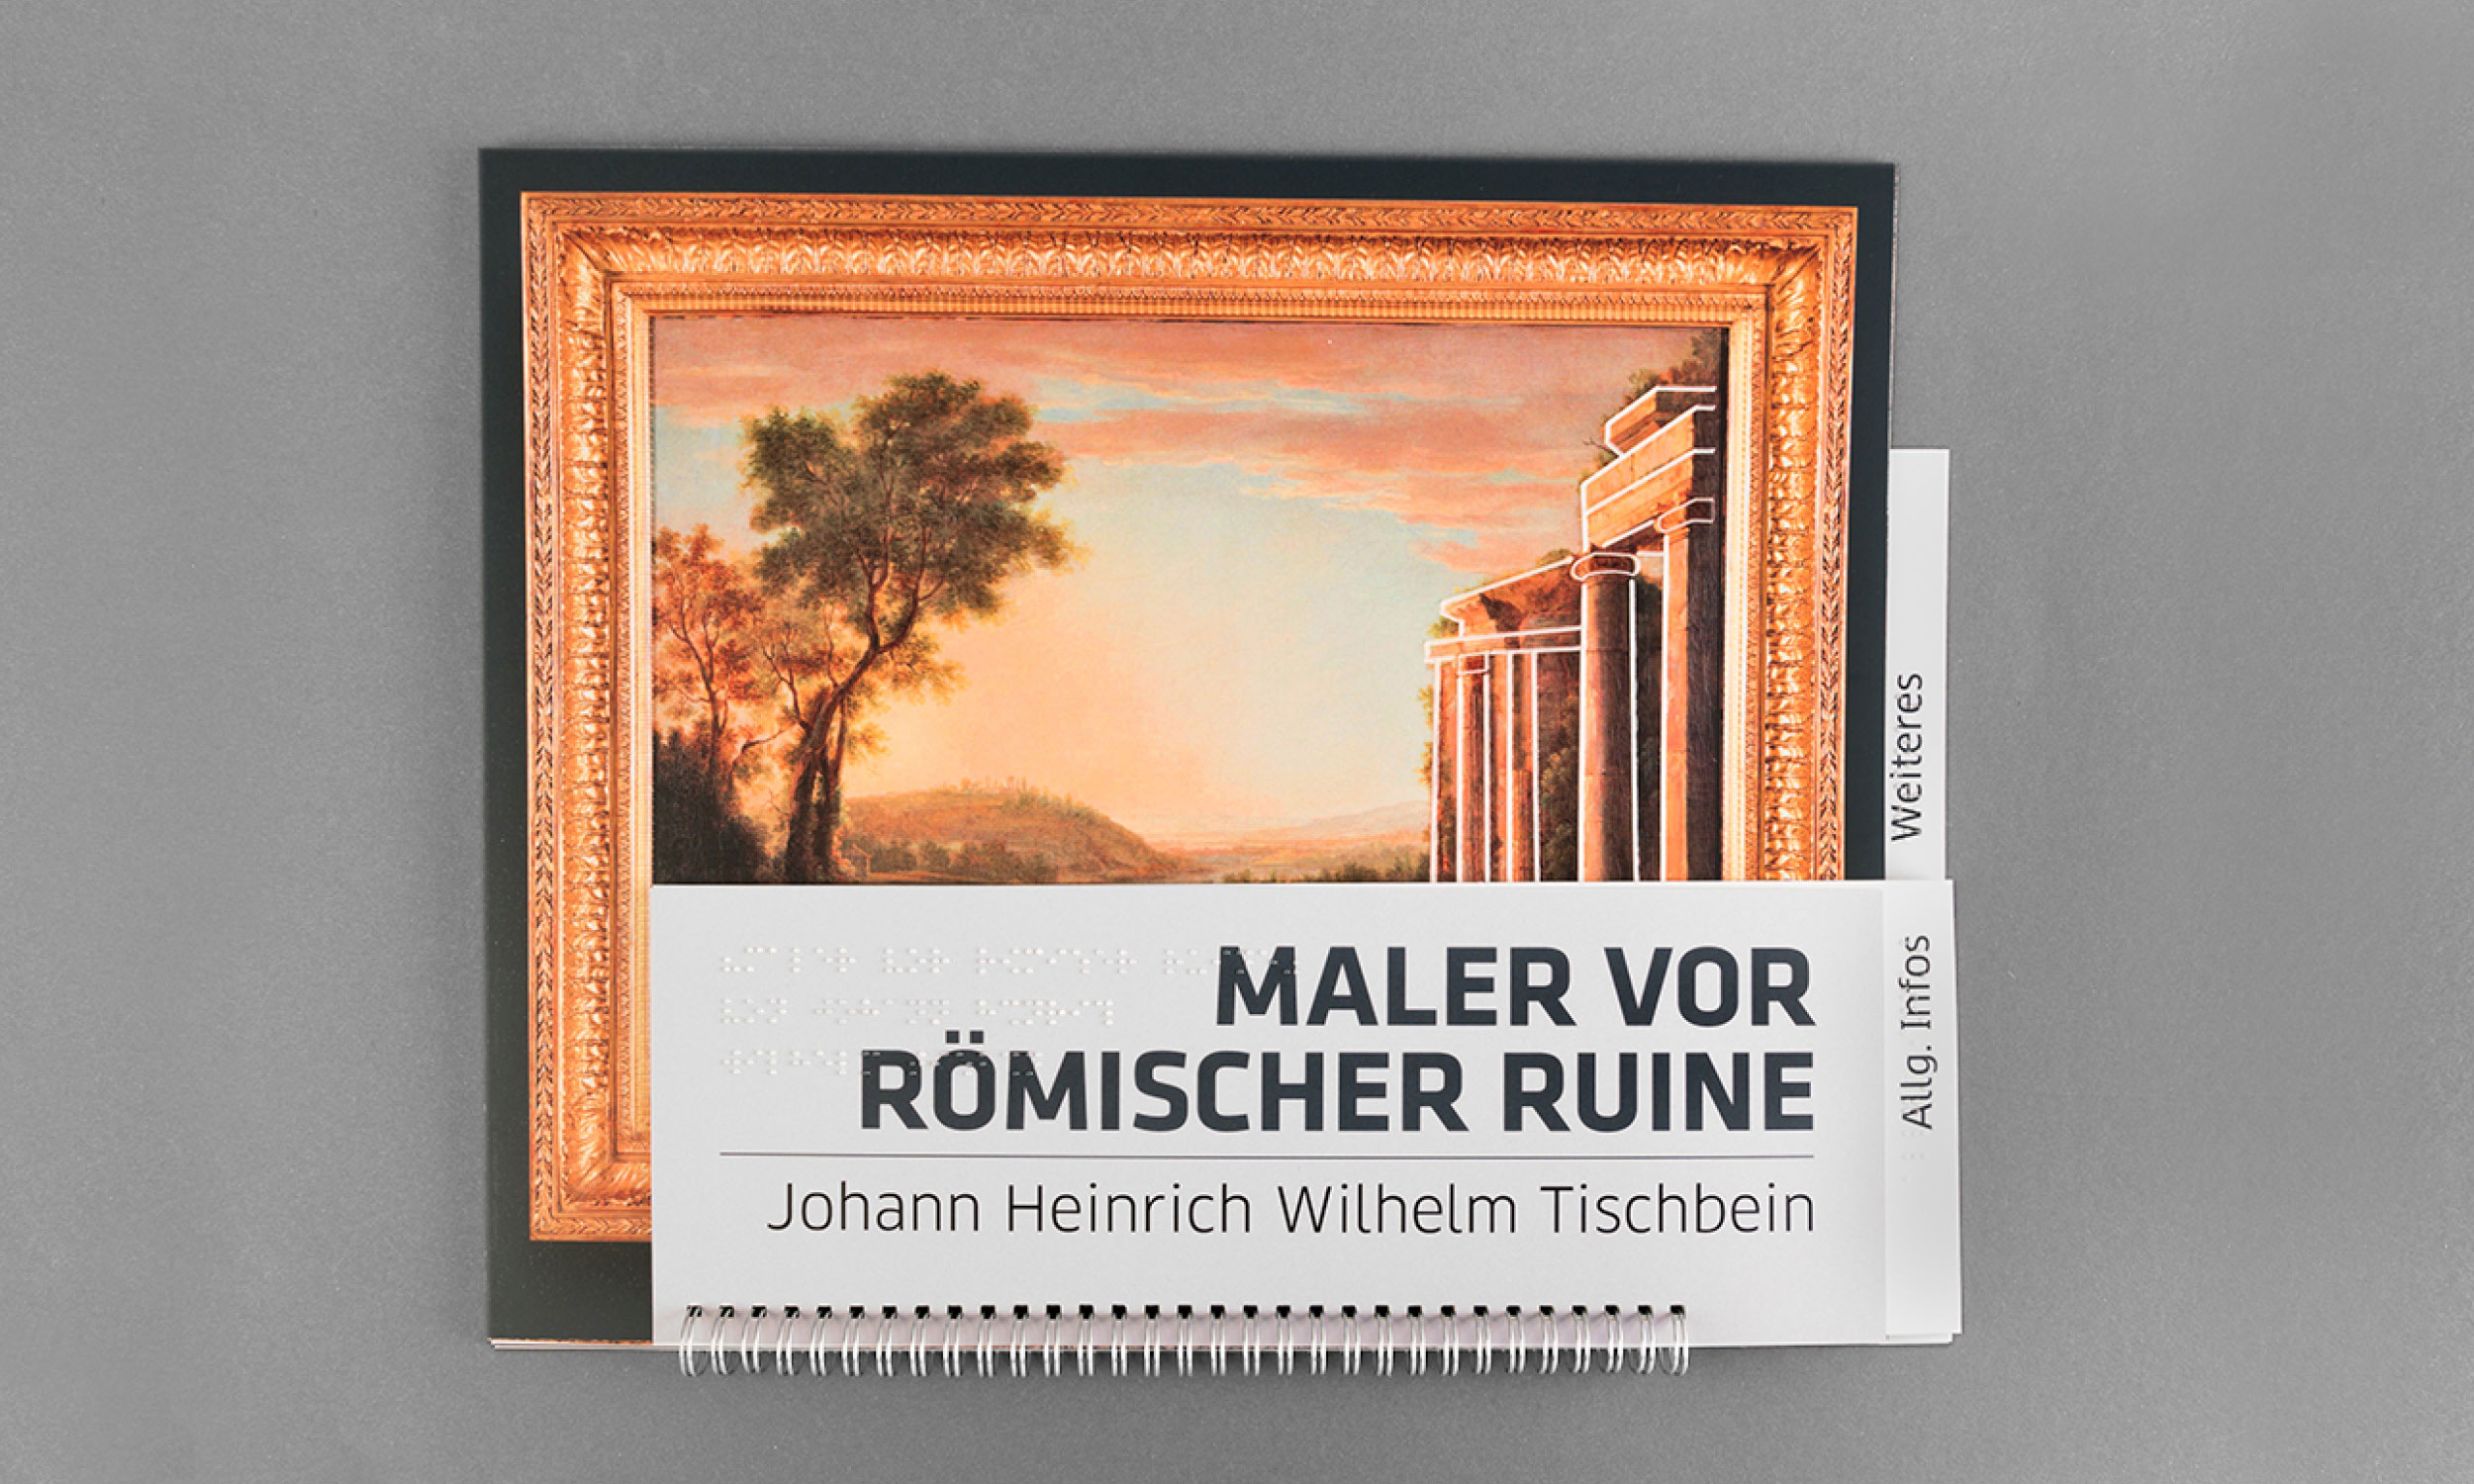 Photo of the tactile booklet accompanying the painting "Painter in front of a Roman ruin" on grey tabletop